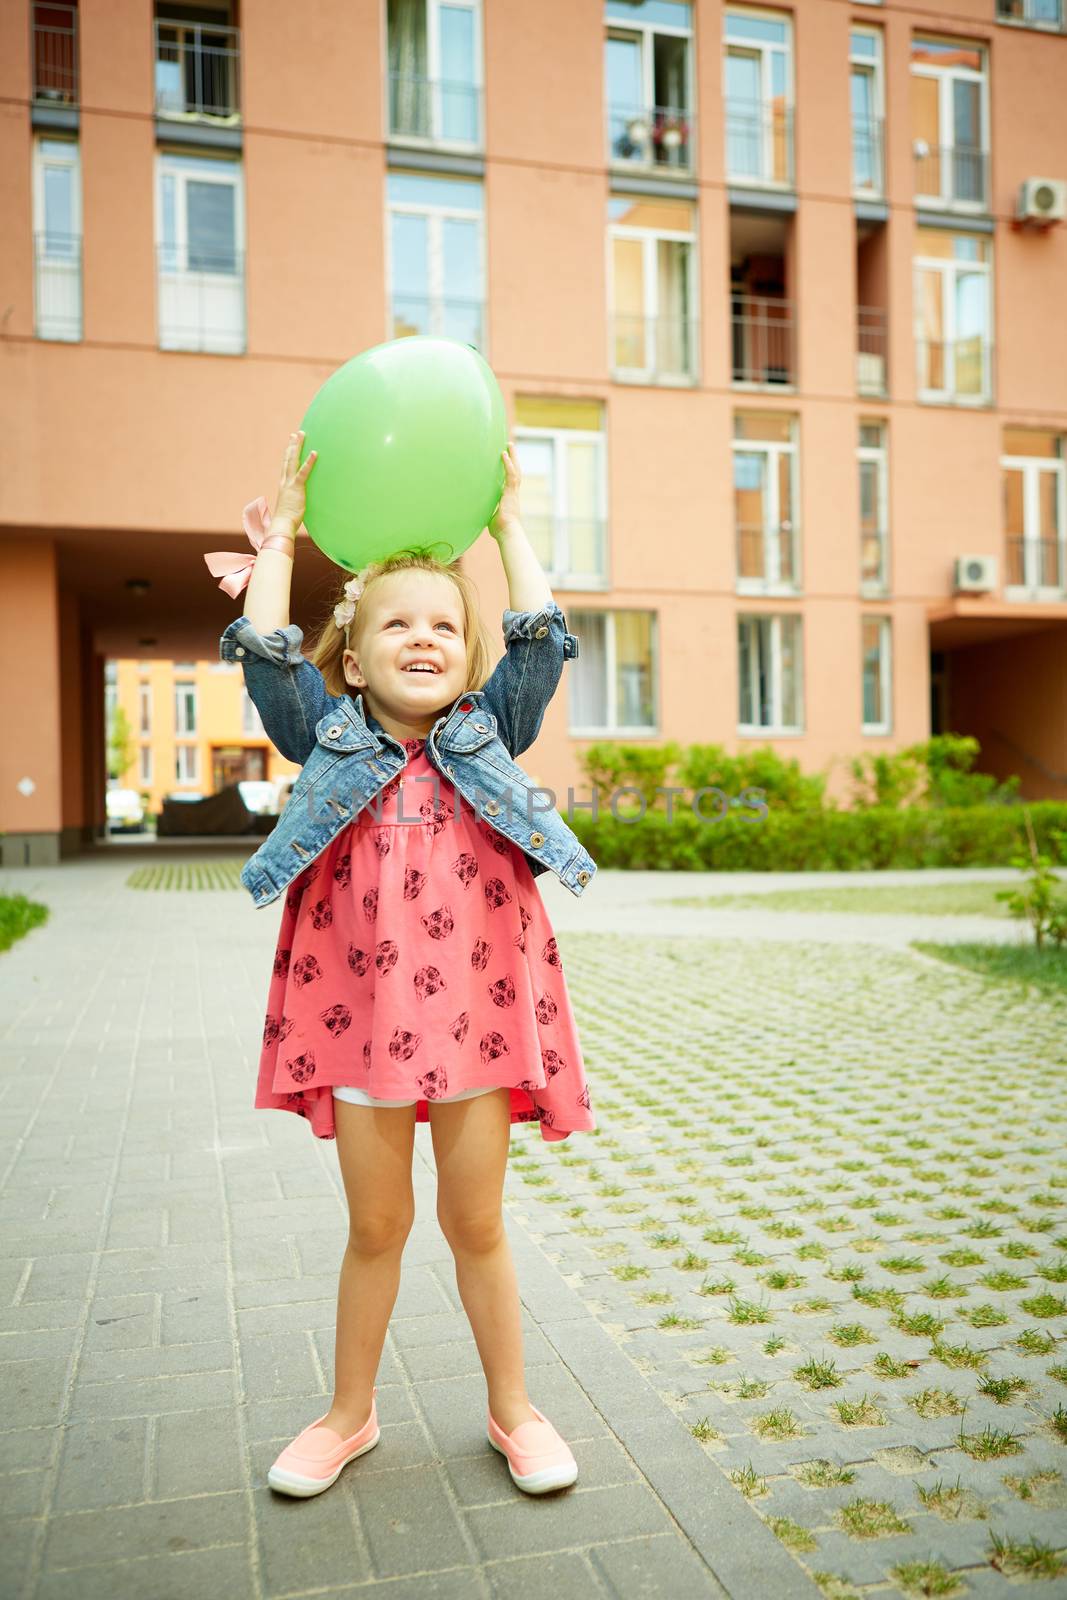 Portrait of funny little child, adorable blonde toddler girl outdoors